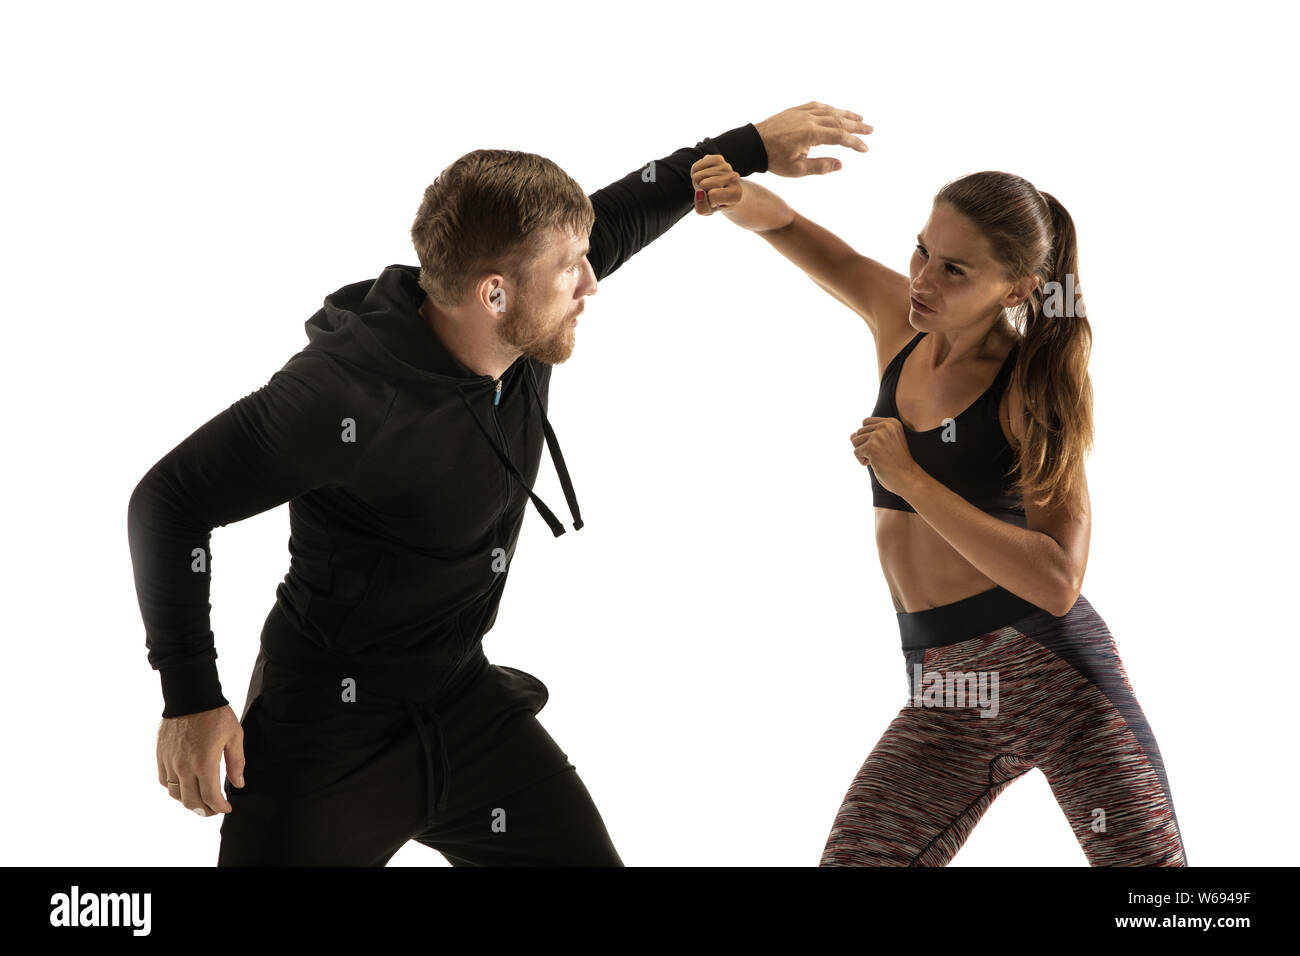 Man in black outfit and athletic caucasian woman fighting on white studio background. Women's self-defense, rights, equality concept. Confronting domestic violence or robbery on the street. Stock Photo